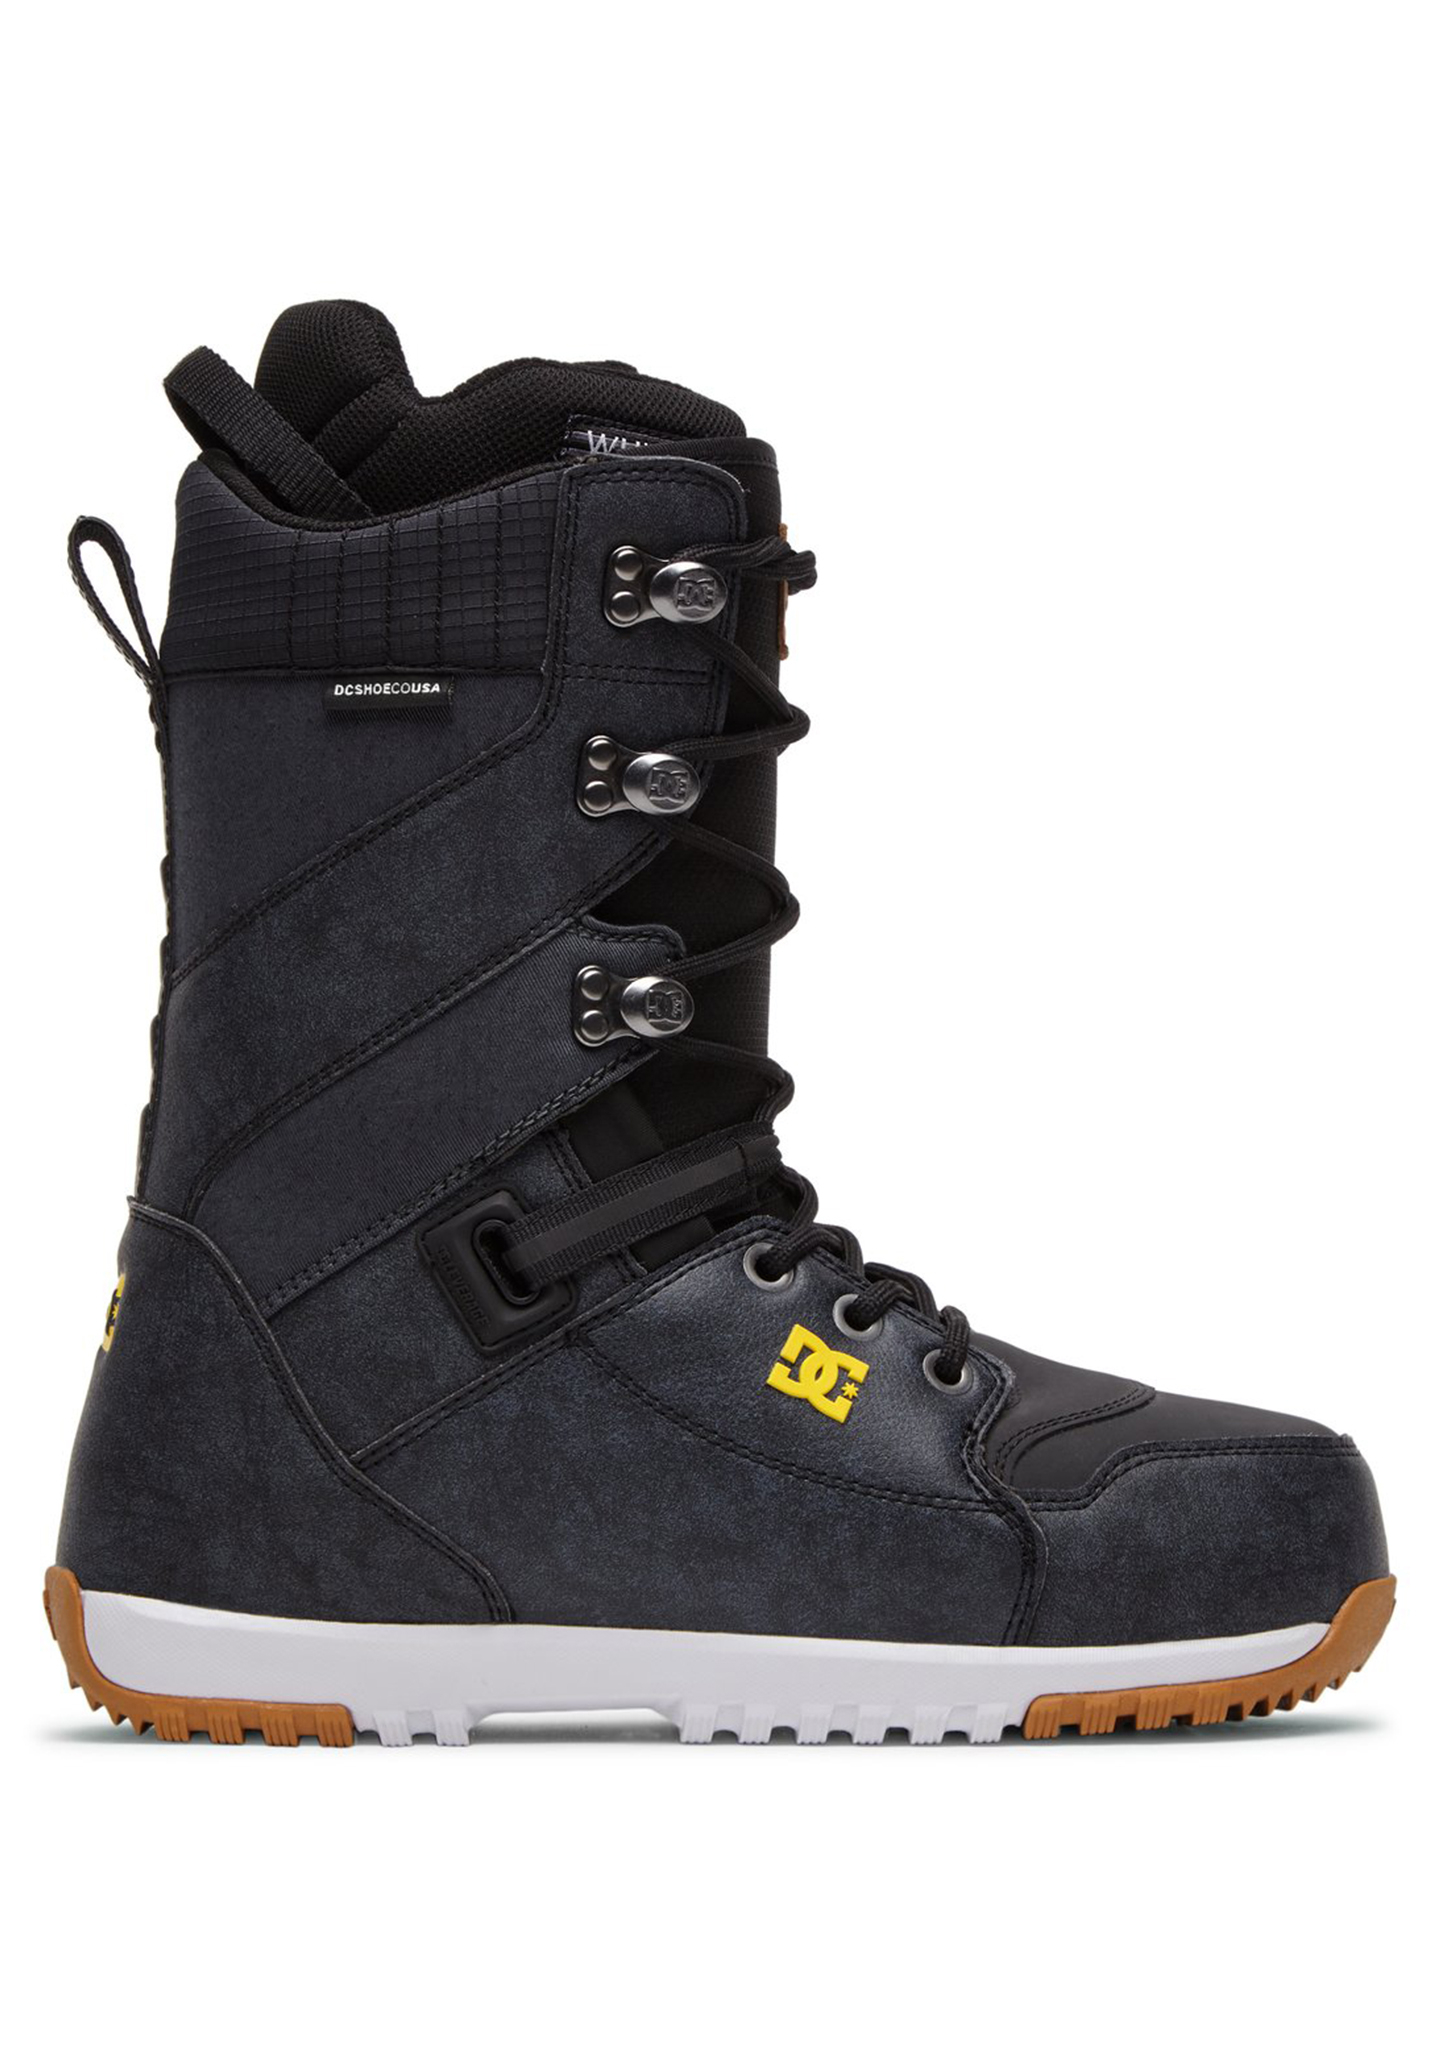 DC Mutiny All Mountain Snowboard Boots black 46